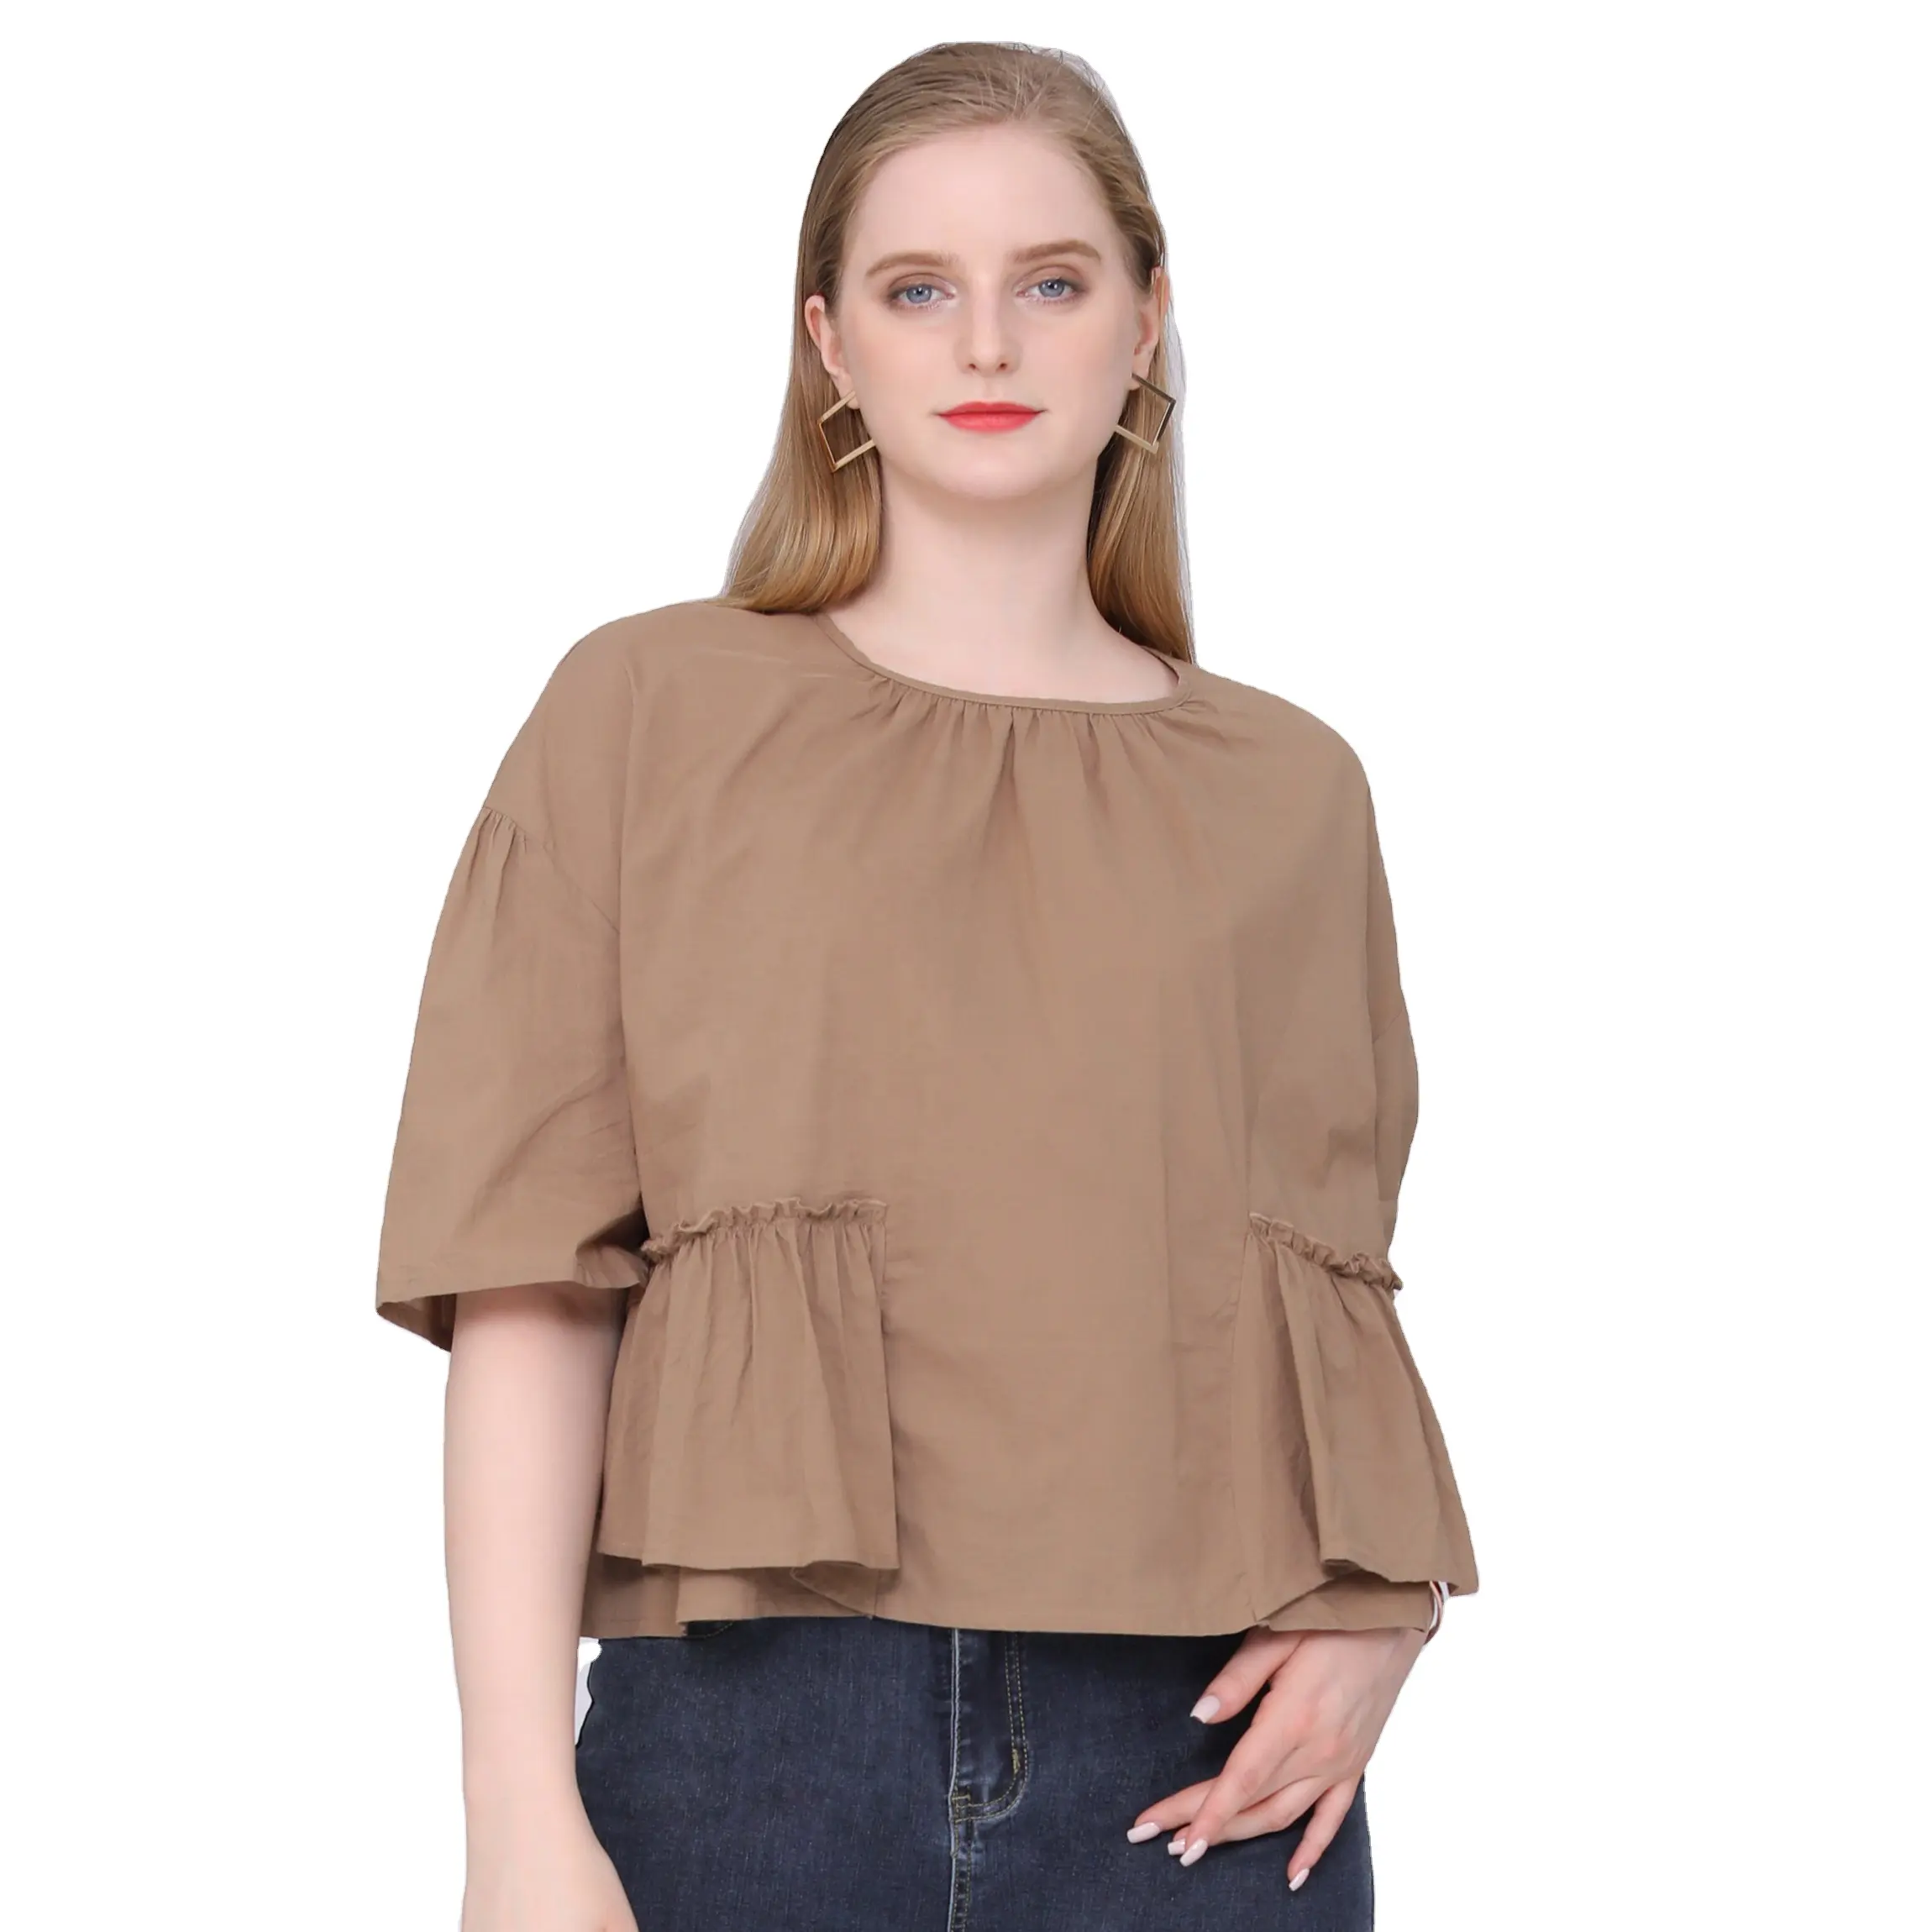 2022 new arrival casual designs short sleeve O-Neck women's tops brown shirt ladies tops for women